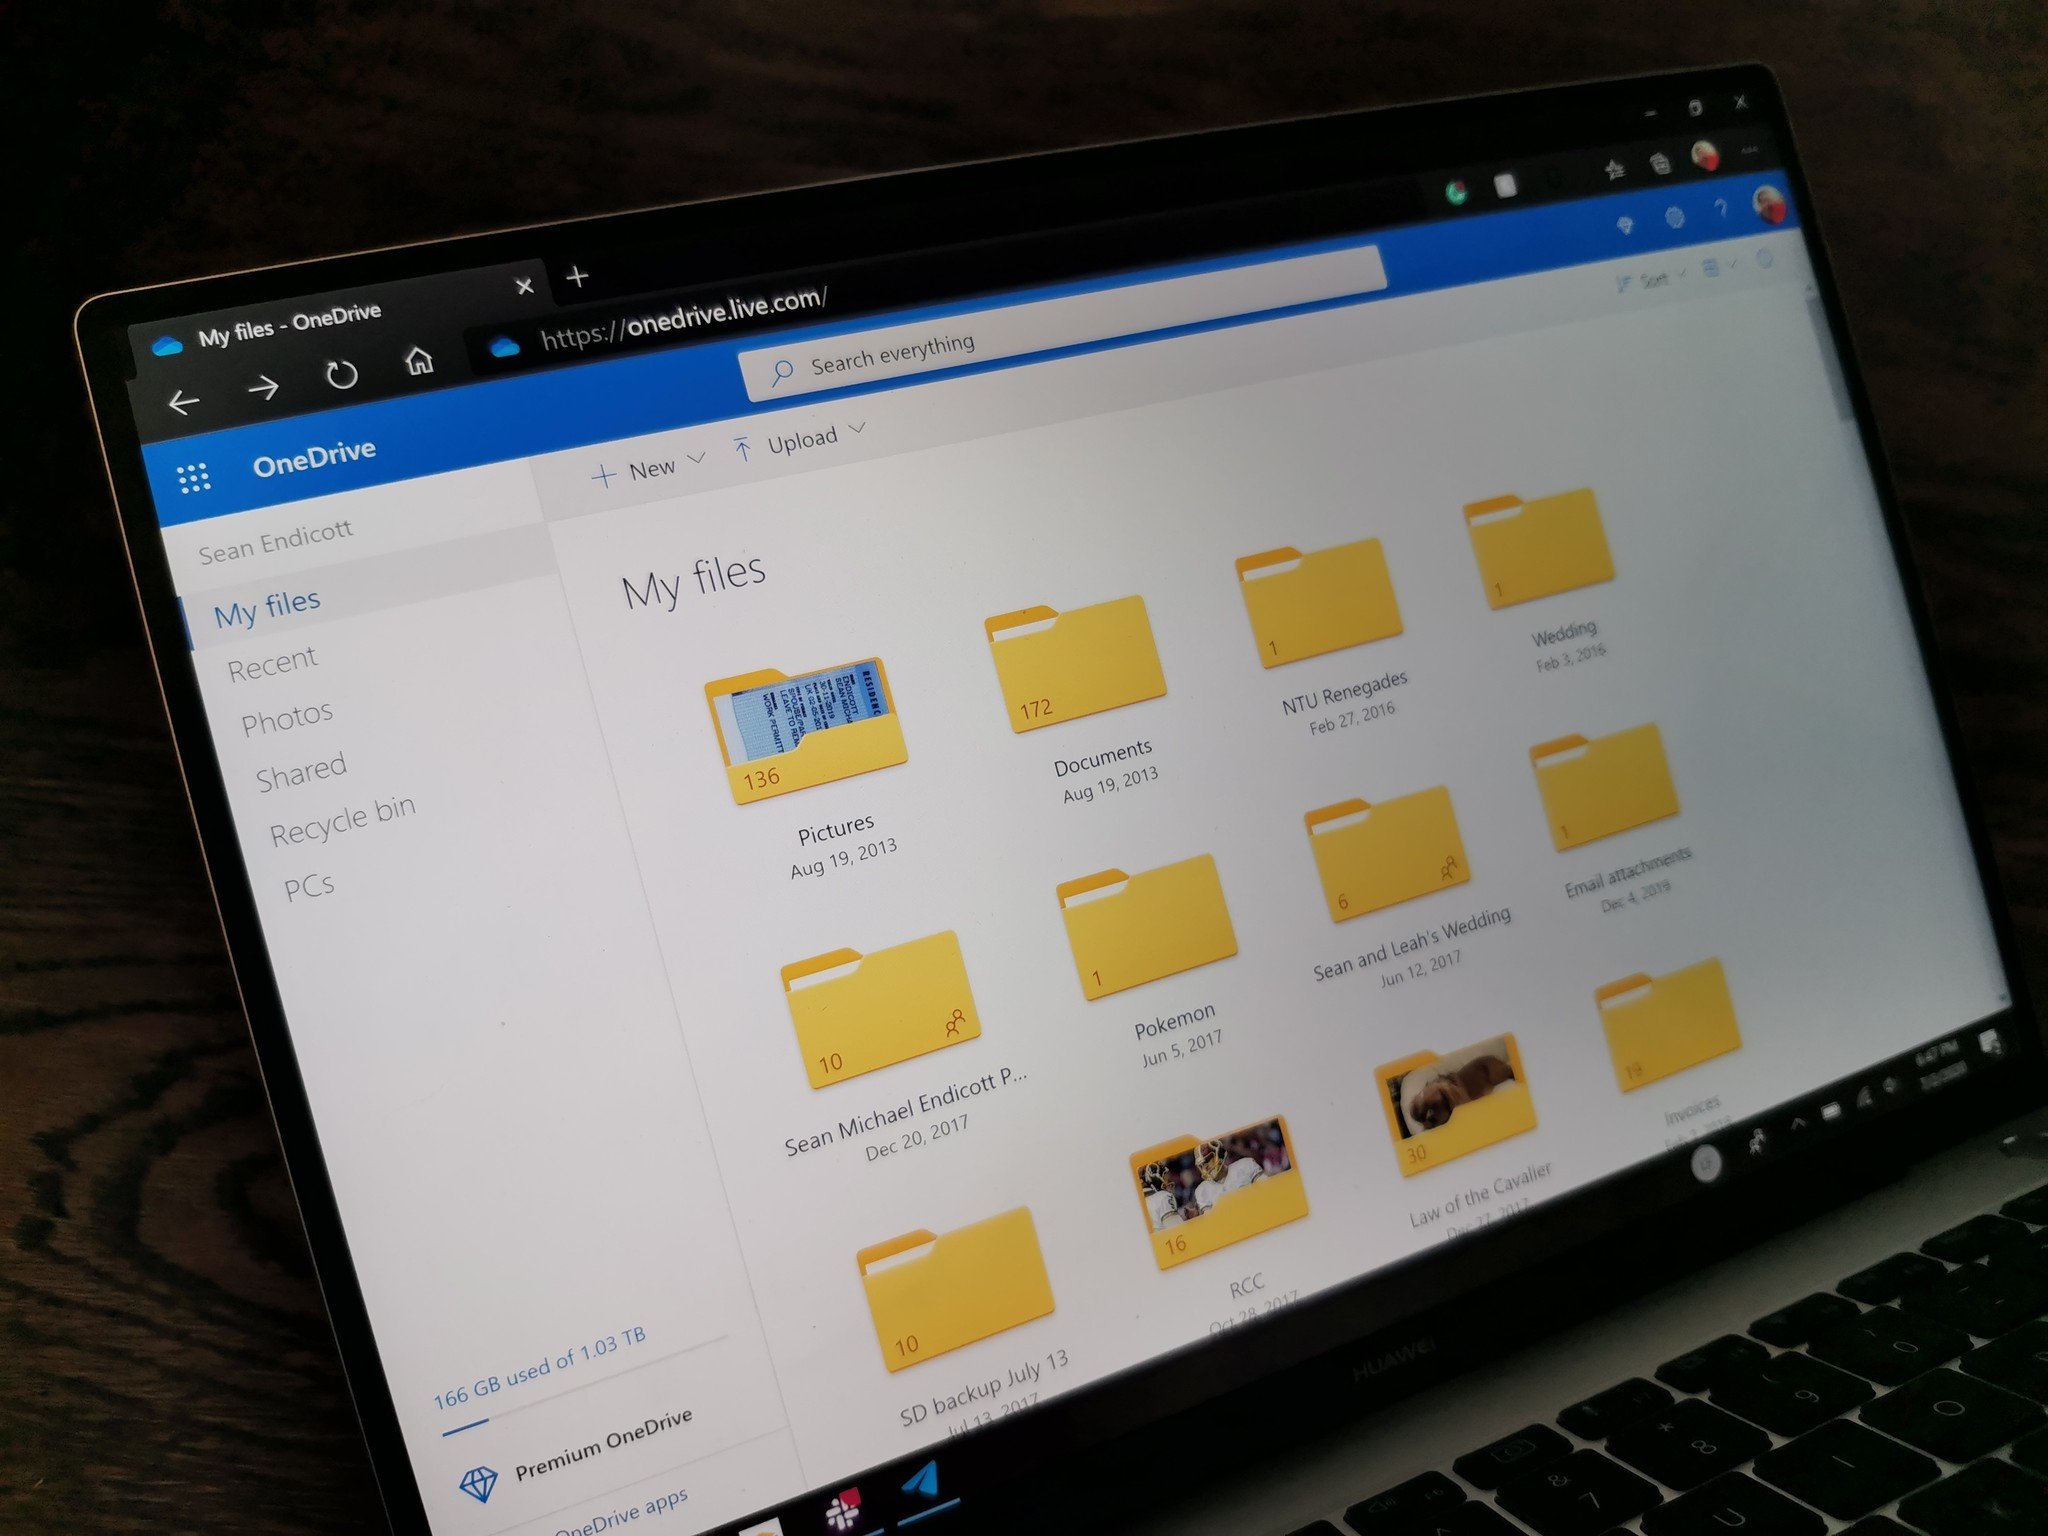 Microsoft's OneDrive is now a progressive web app (PWA). The move allows the website to feel a bit more like a native app. It can now be 